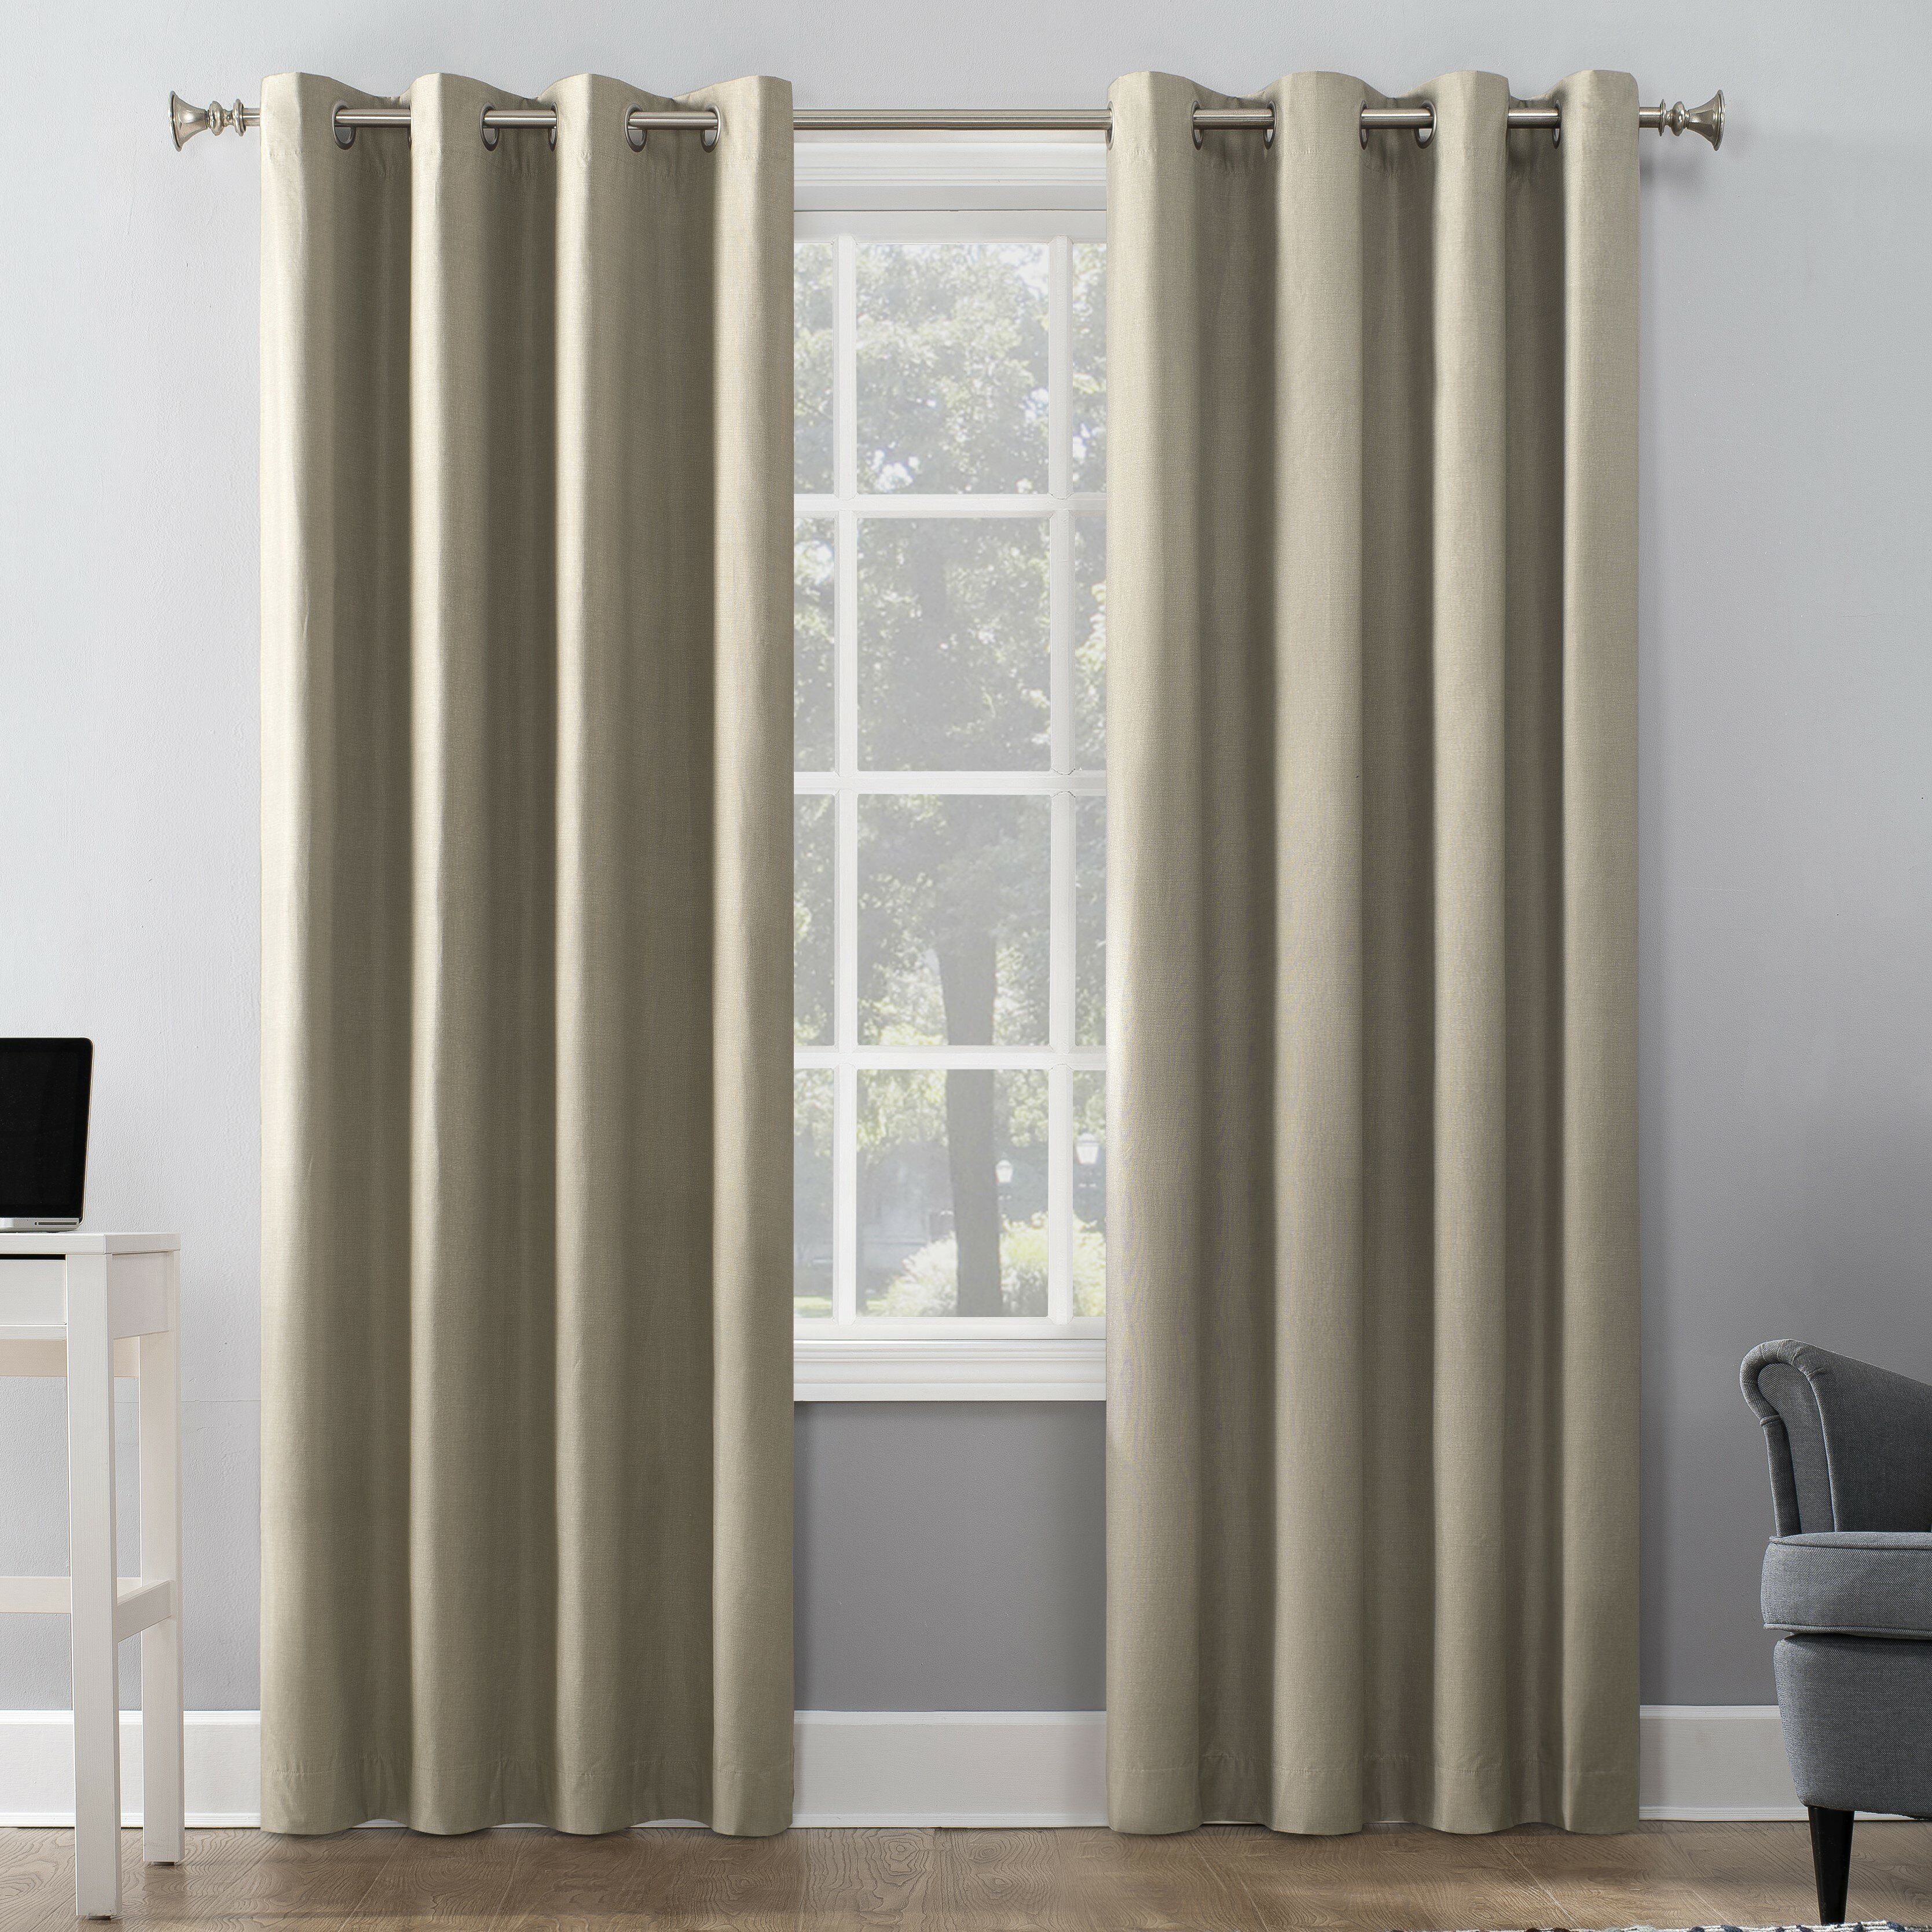 Duran Insulated Max Blackout Thermal Grommet Single Curtain Panel With Regard To Duran Thermal Insulated Blackout Grommet Curtain Panels (View 4 of 20)